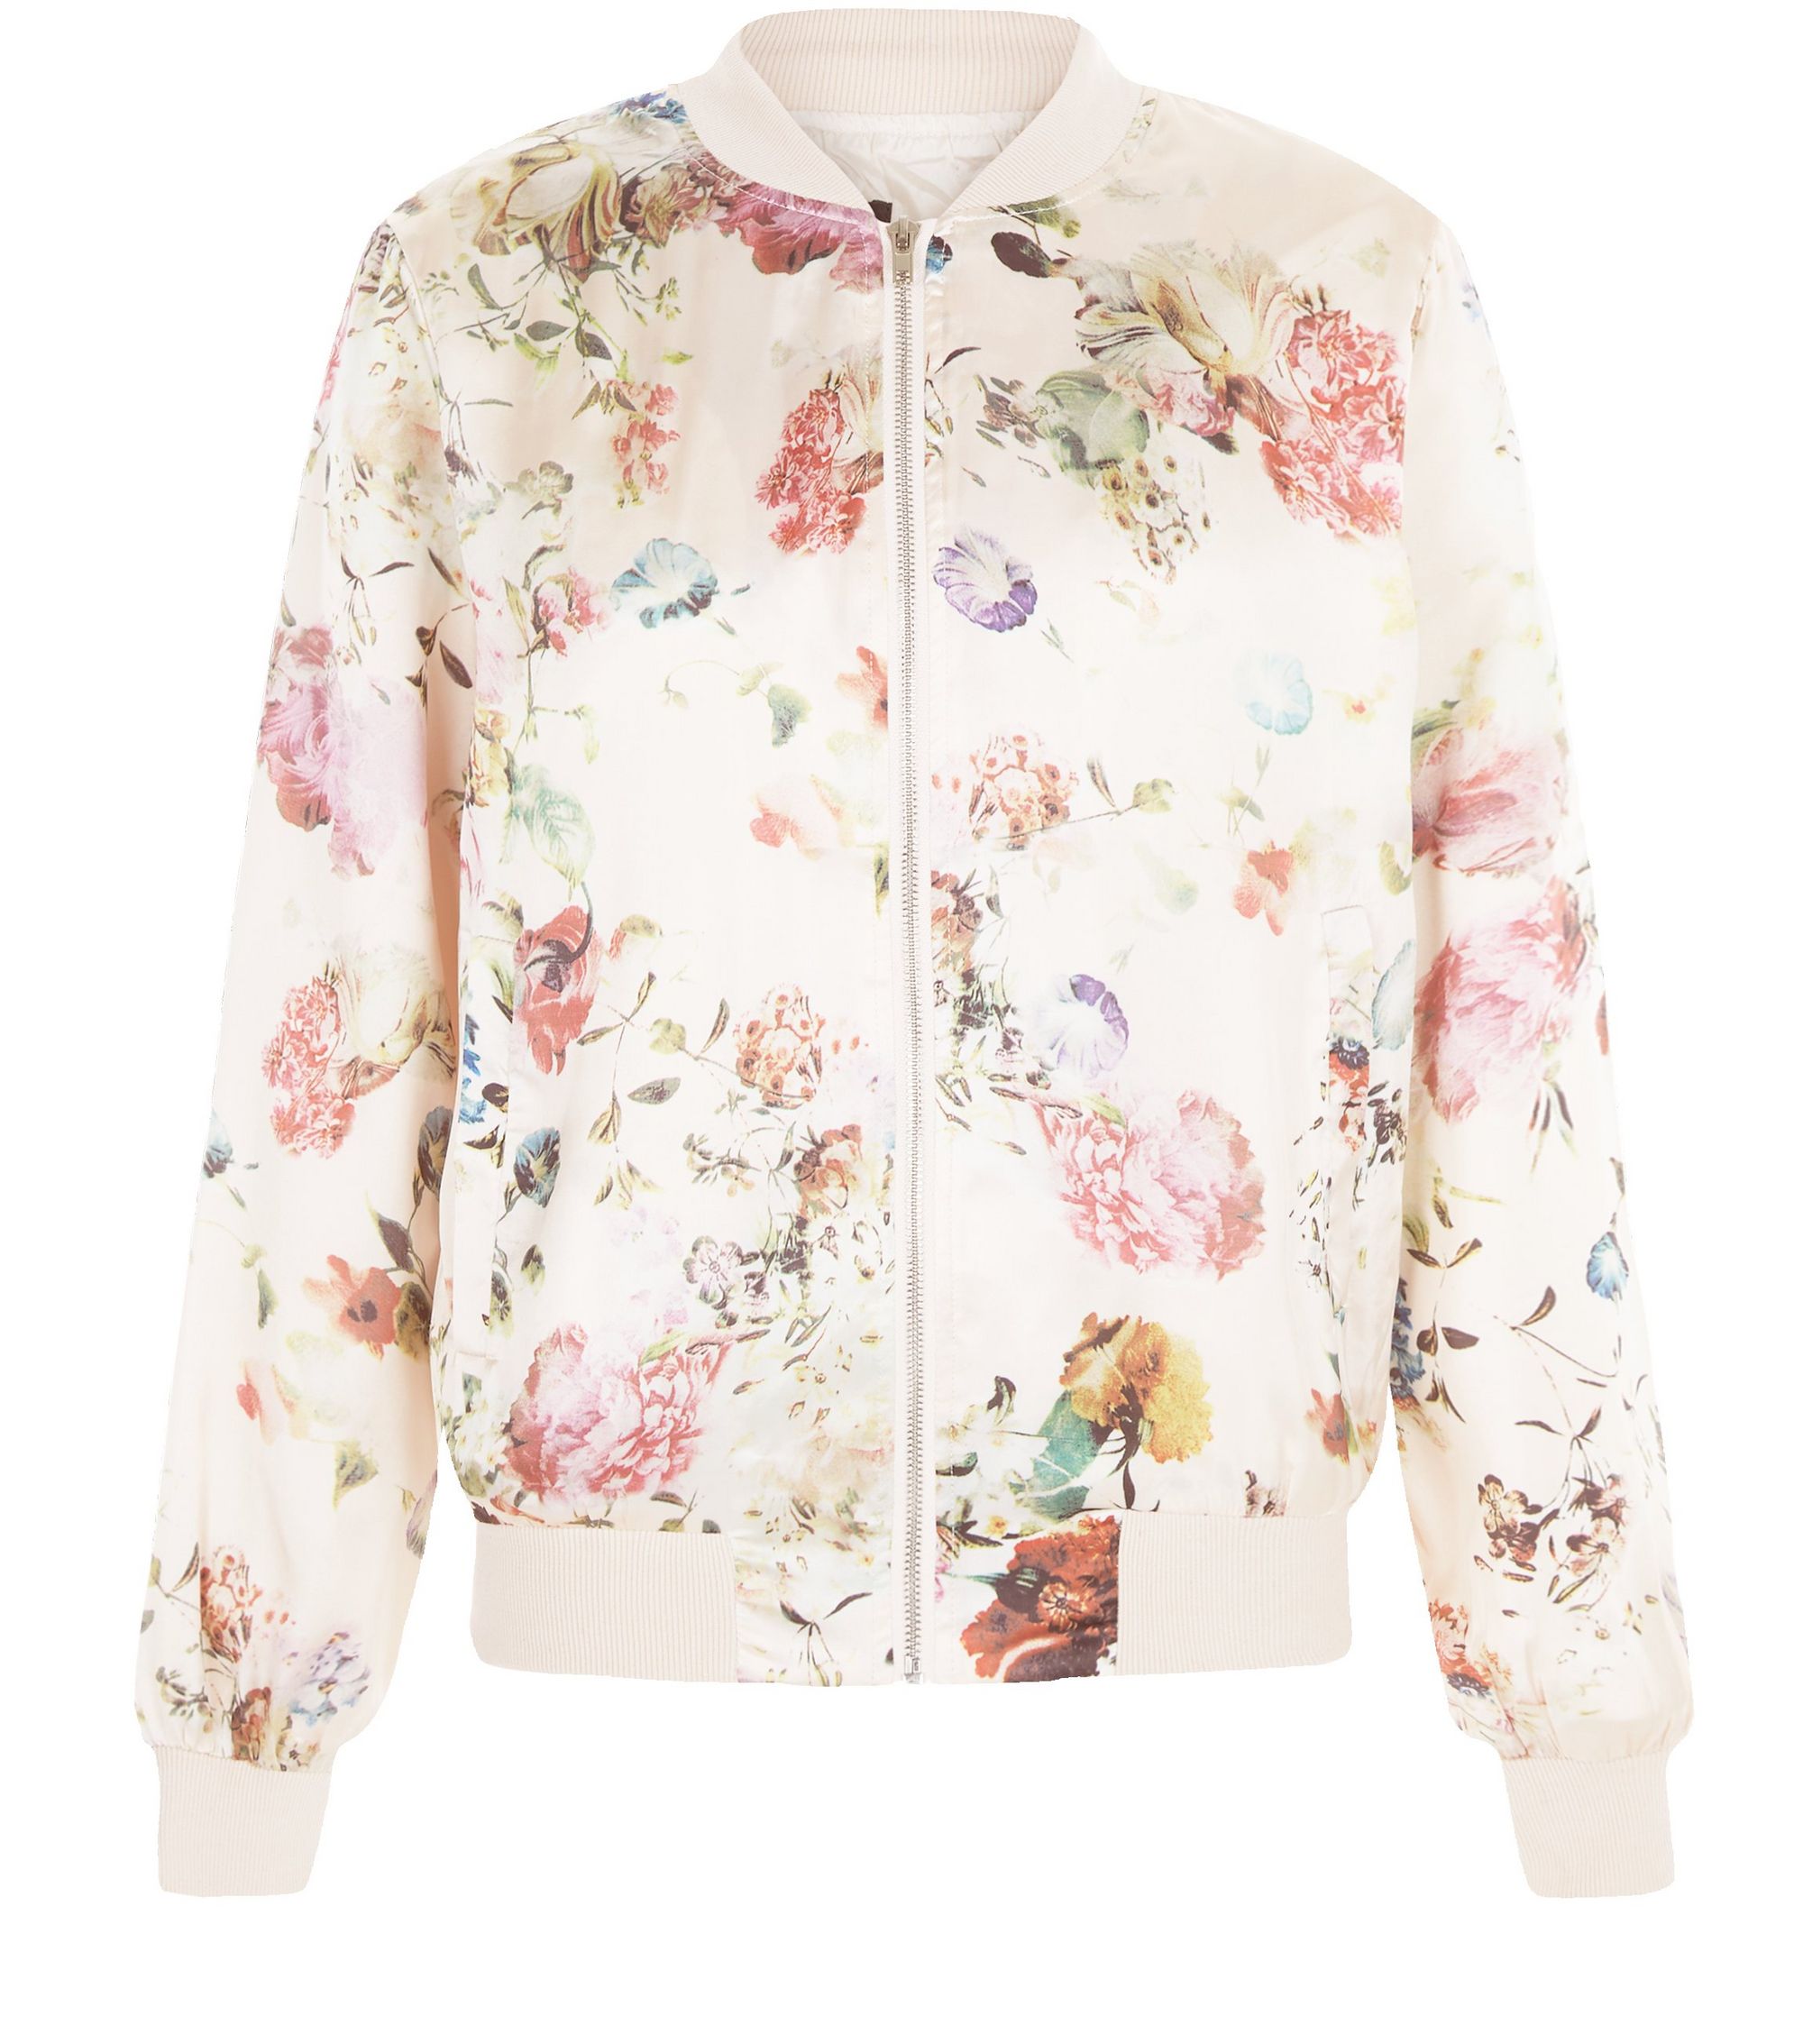 New Look Pink Floral Print Bomber Jacket - Satiny.org